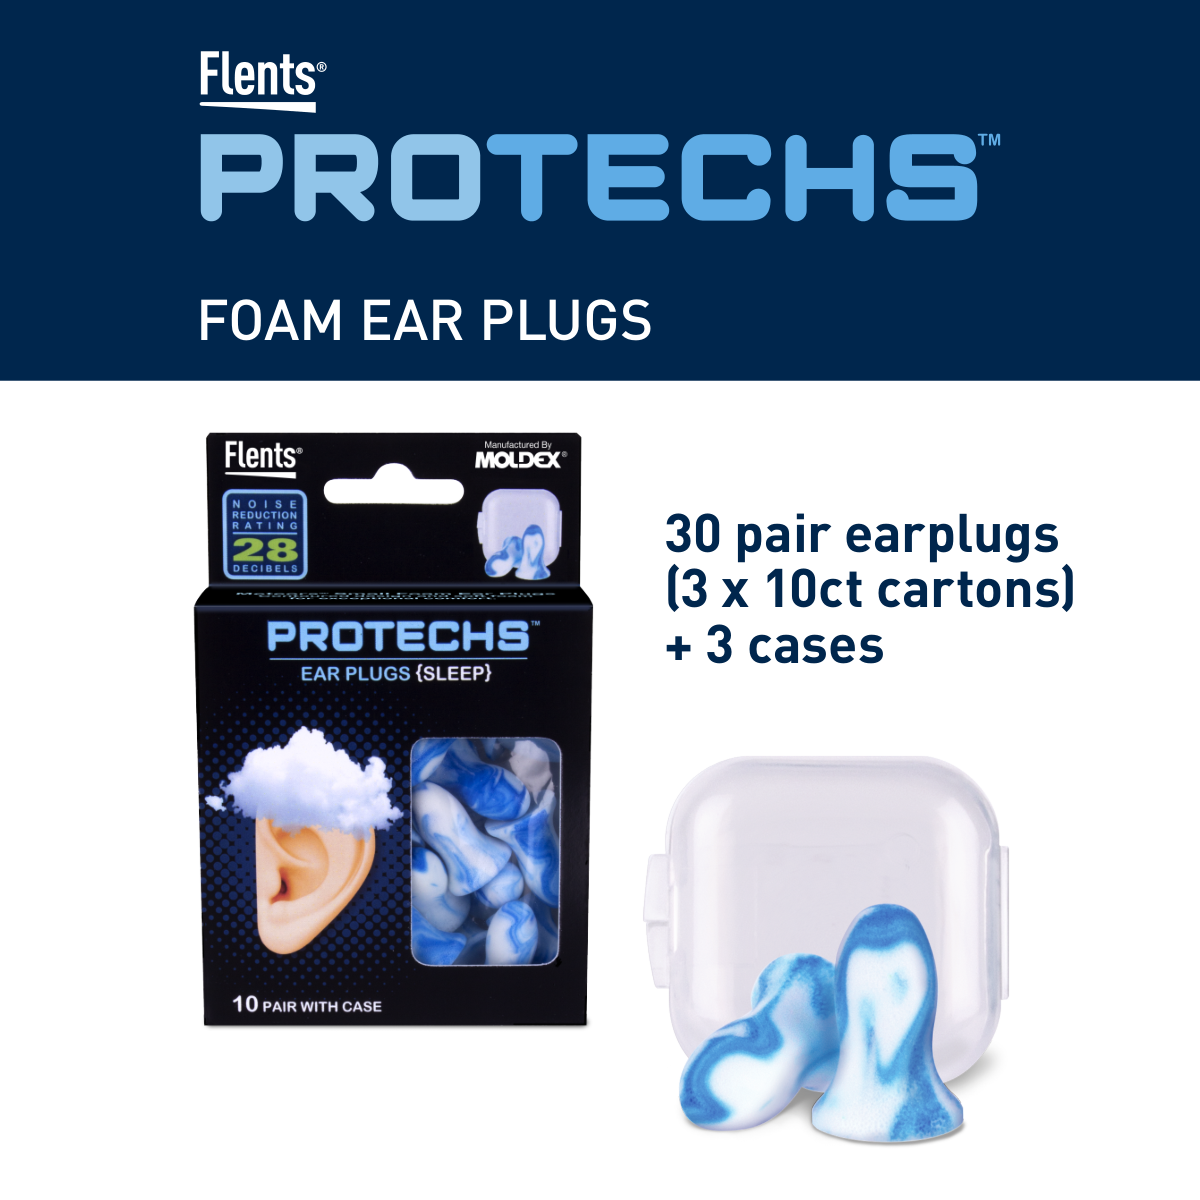 Flents PROTECHS™ Ear Plugs for Sleeping, 30 Pair with Case, NRR 28 - image 3 of 7